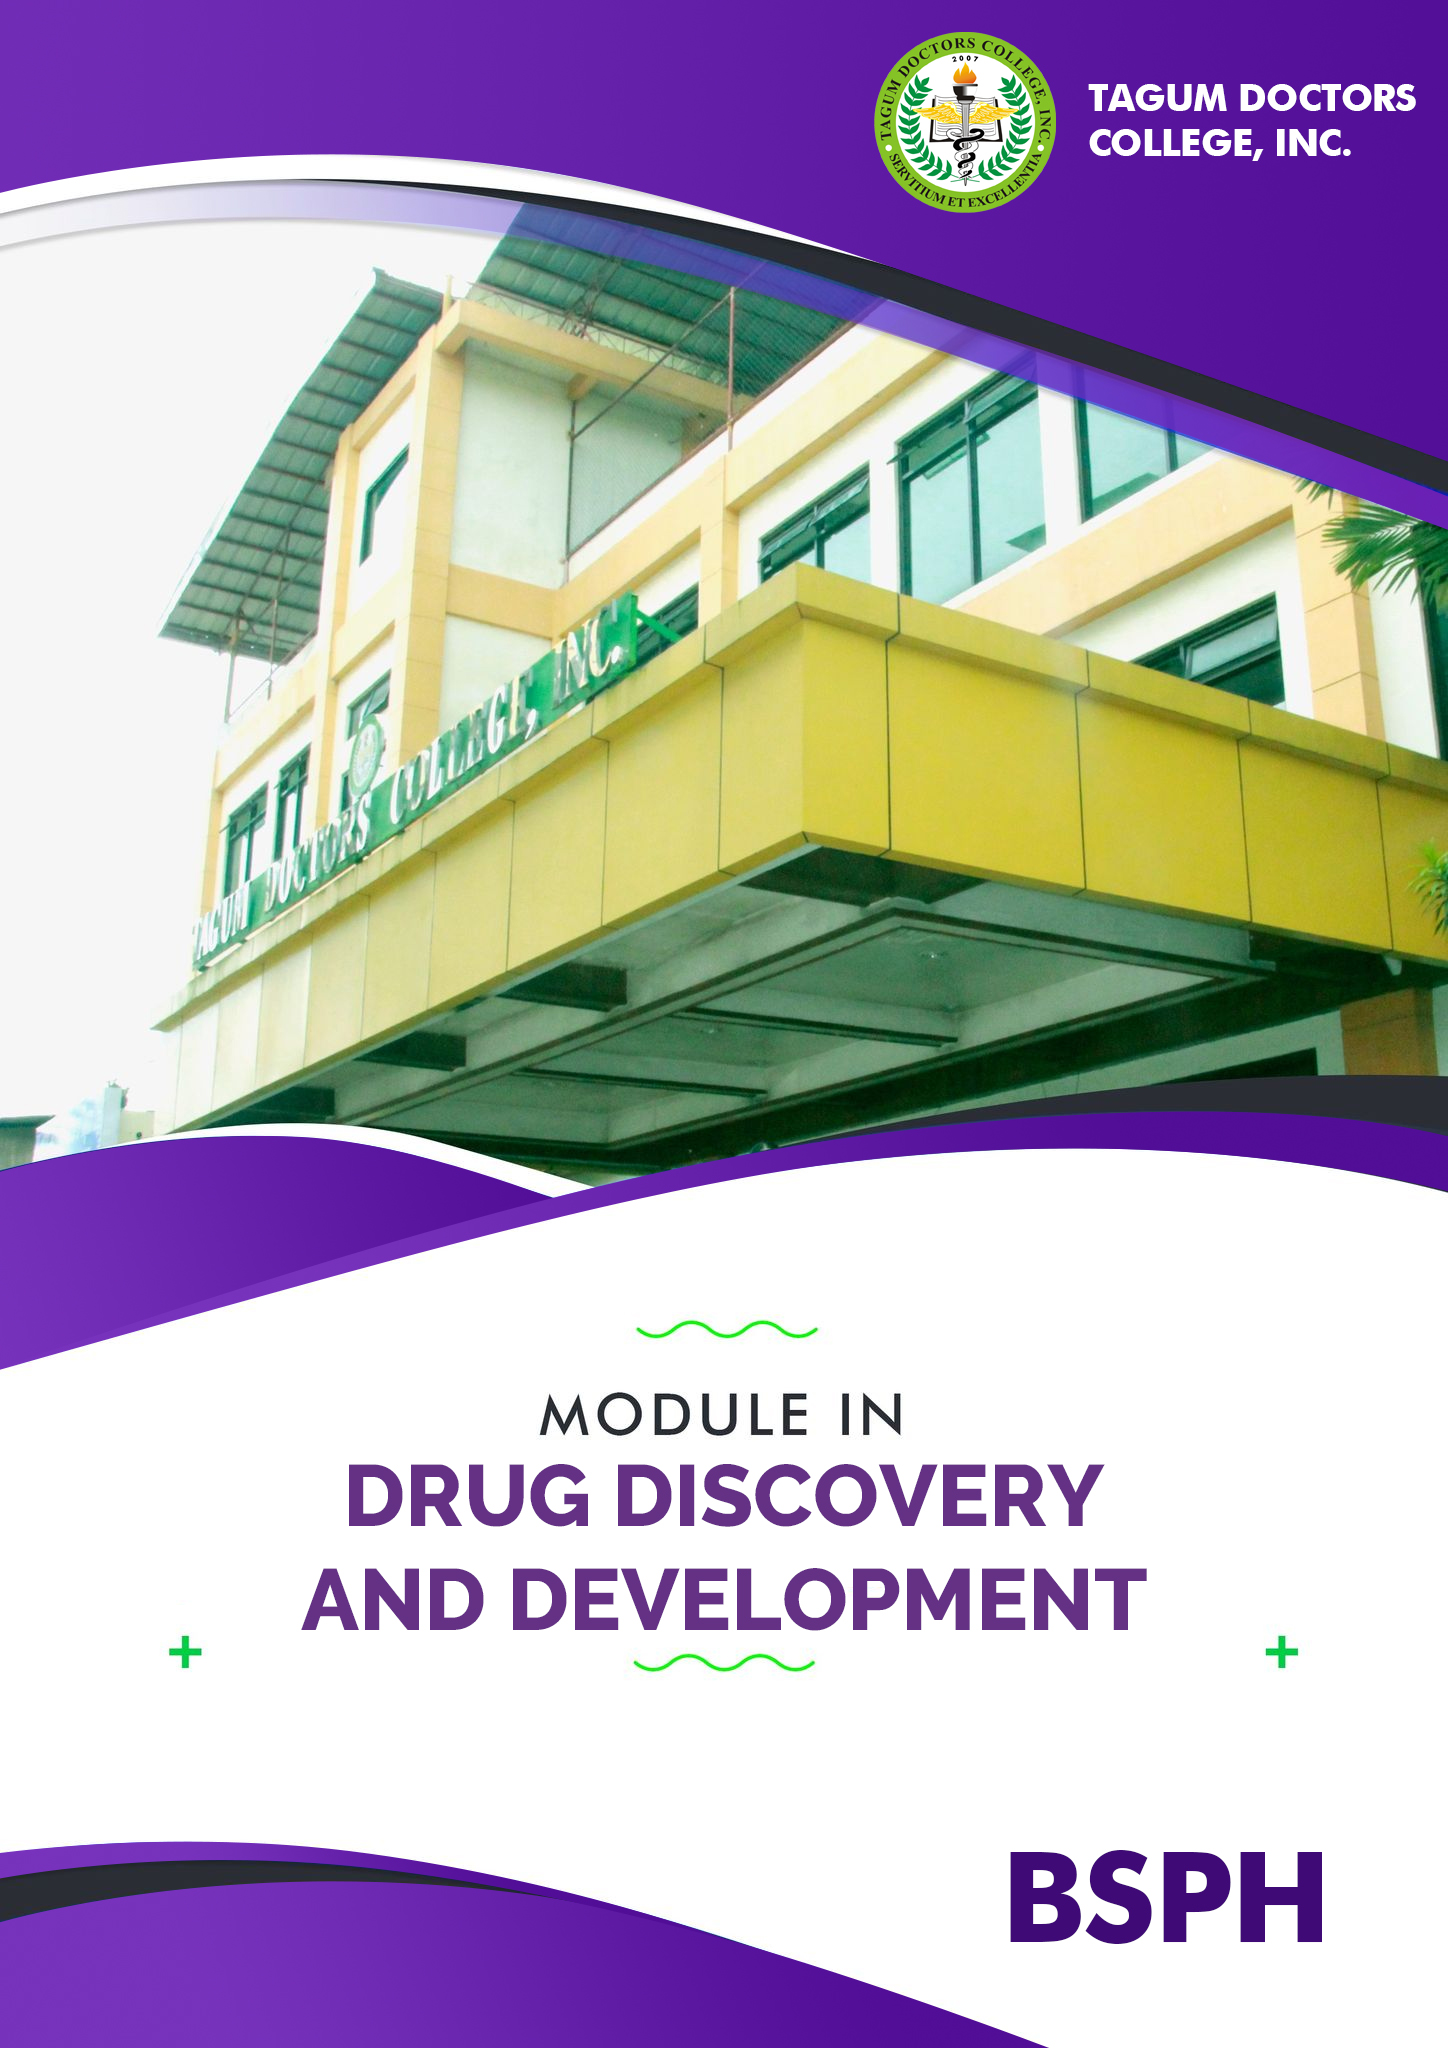 Drug Discovery and Development  - BSPh 3B